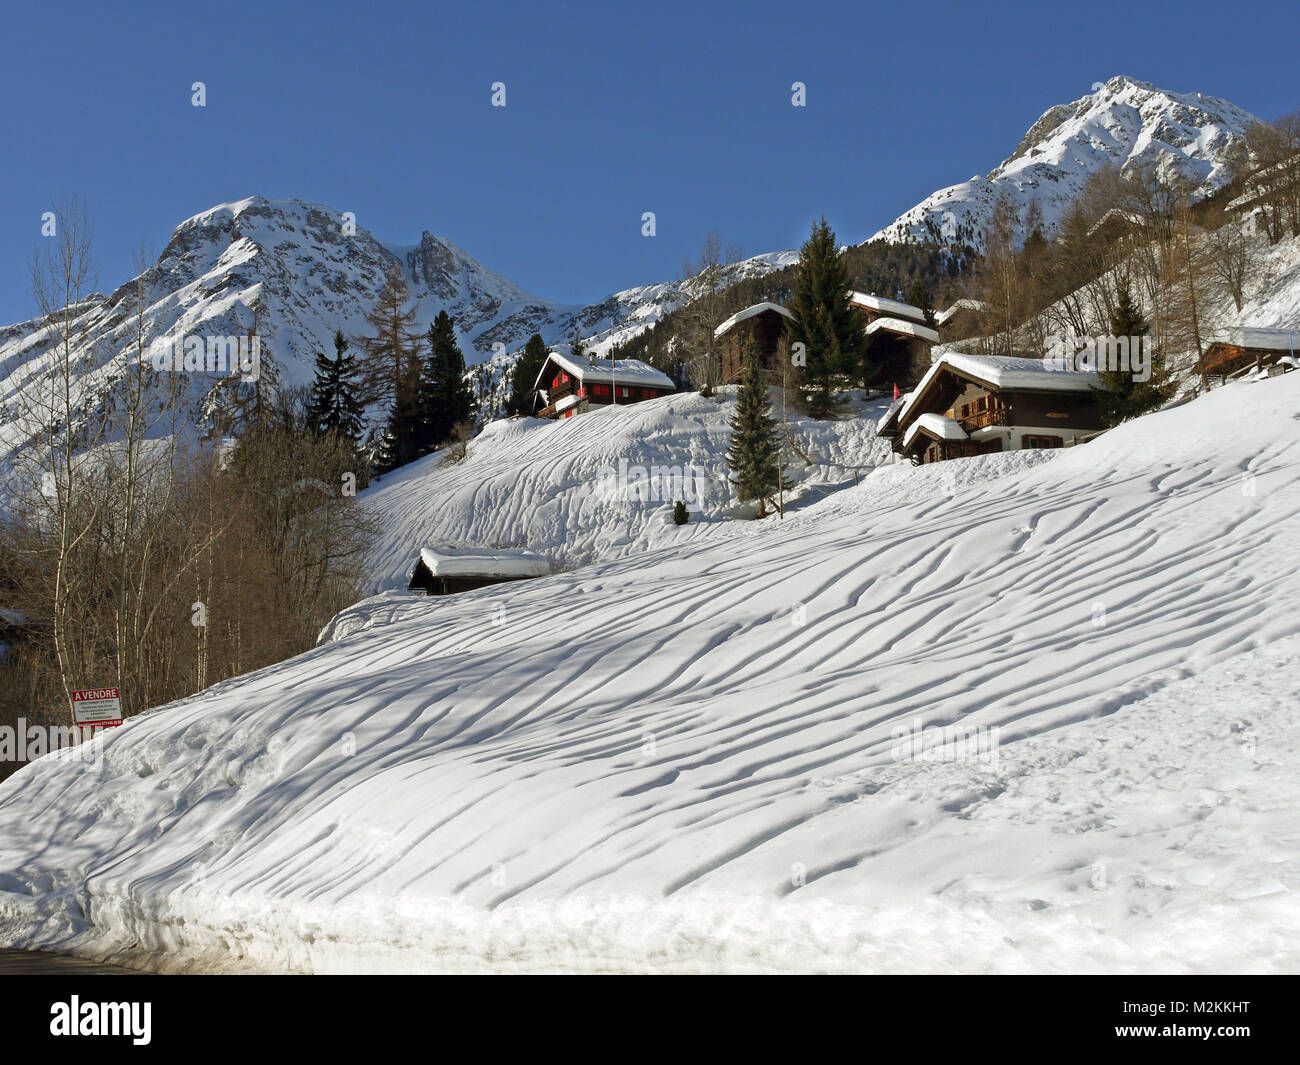 Large amounts of snow fell in January in Grimentz, followed by heavy rain, even up to 2,000 metres causing these rivulates or markings in the snow. Stock Photo